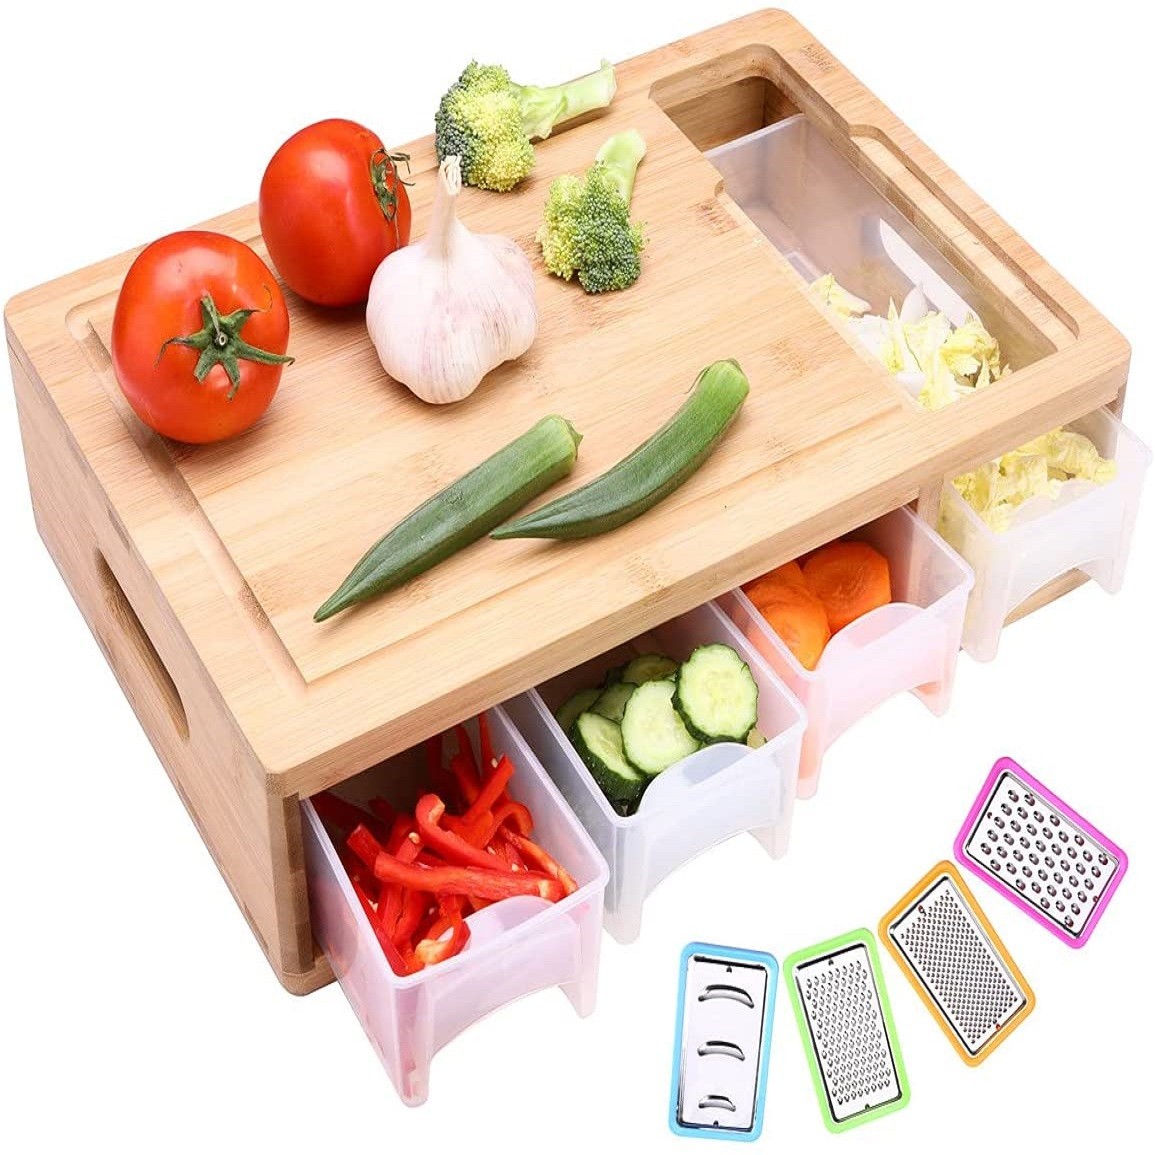 Cutting Board Containers - Shared Gadget